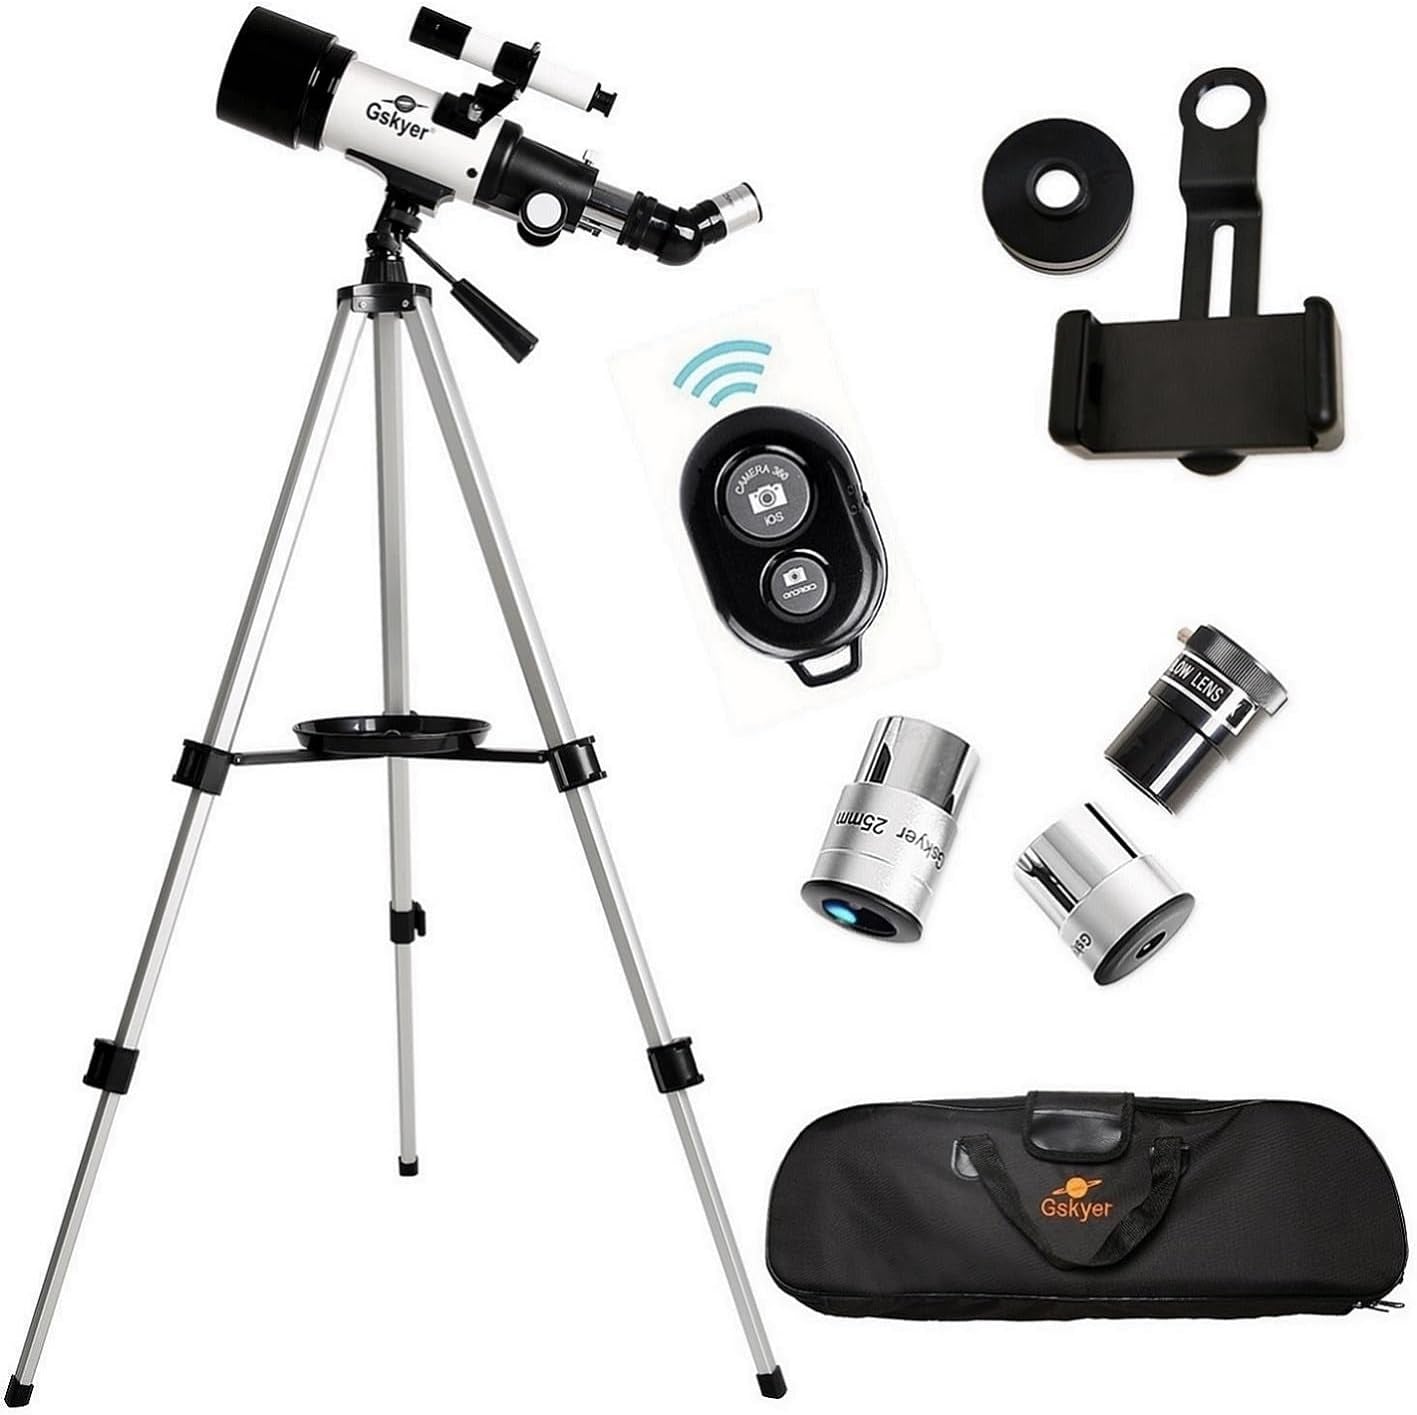 70mm Aperture 400mm AZ Mount Astronomical Refracting Telescope  for Kids and Beginners, Includes Carry Bag, Phone Adapter, and Wireless Remote 